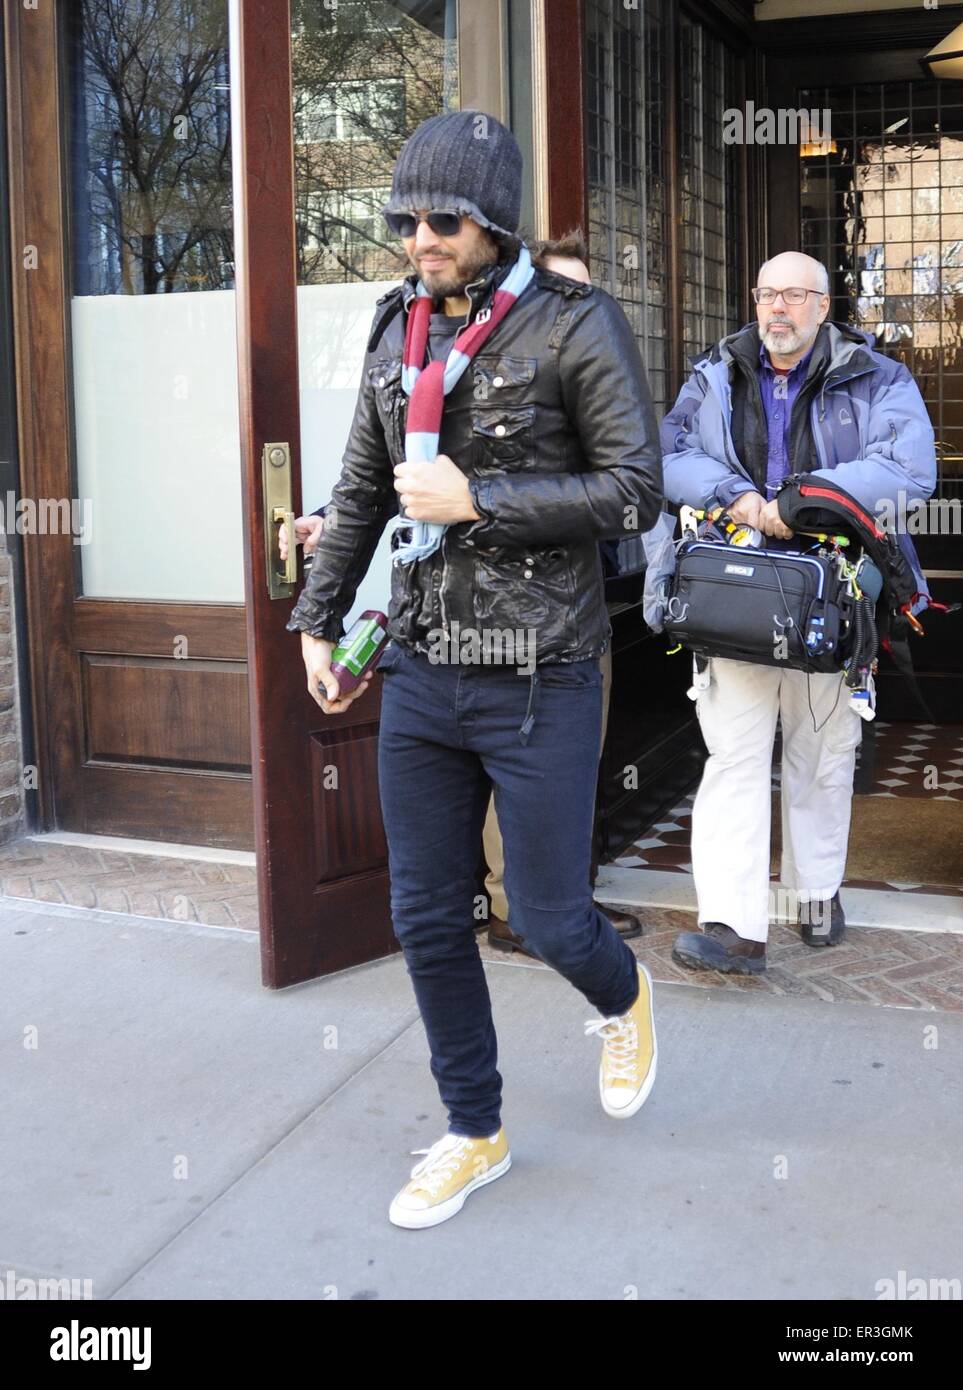 Russell Brand leaves The Greenwich Hotel in Manhattan wearing a claret and blue scarf made in the kit colours of his favourite football team, West Ham United  Featuring: Russell Brand Where: New York City, New York, United States When: 21 Nov 2014 Credit: TNYF/WENN.com Stock Photo